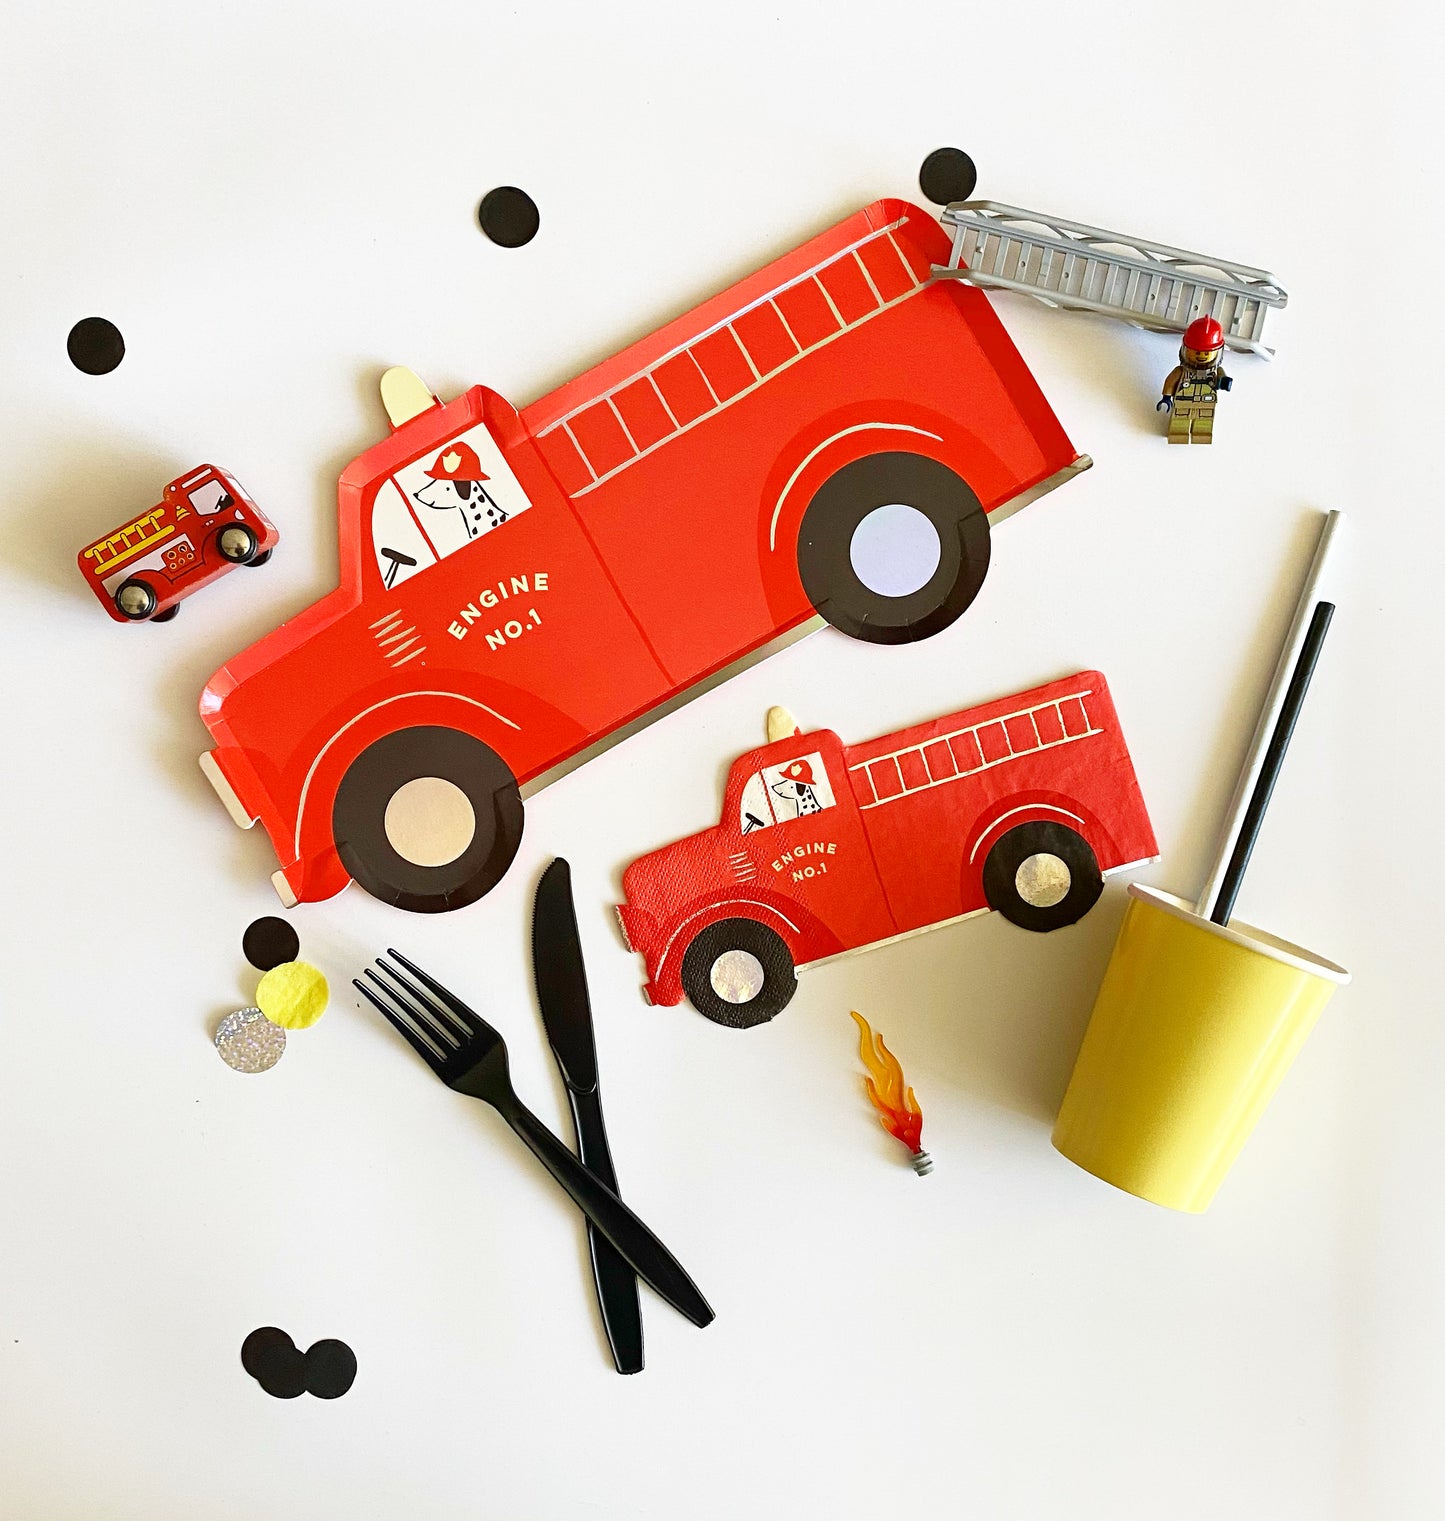 Fire Truck Napkins - Pack of 16